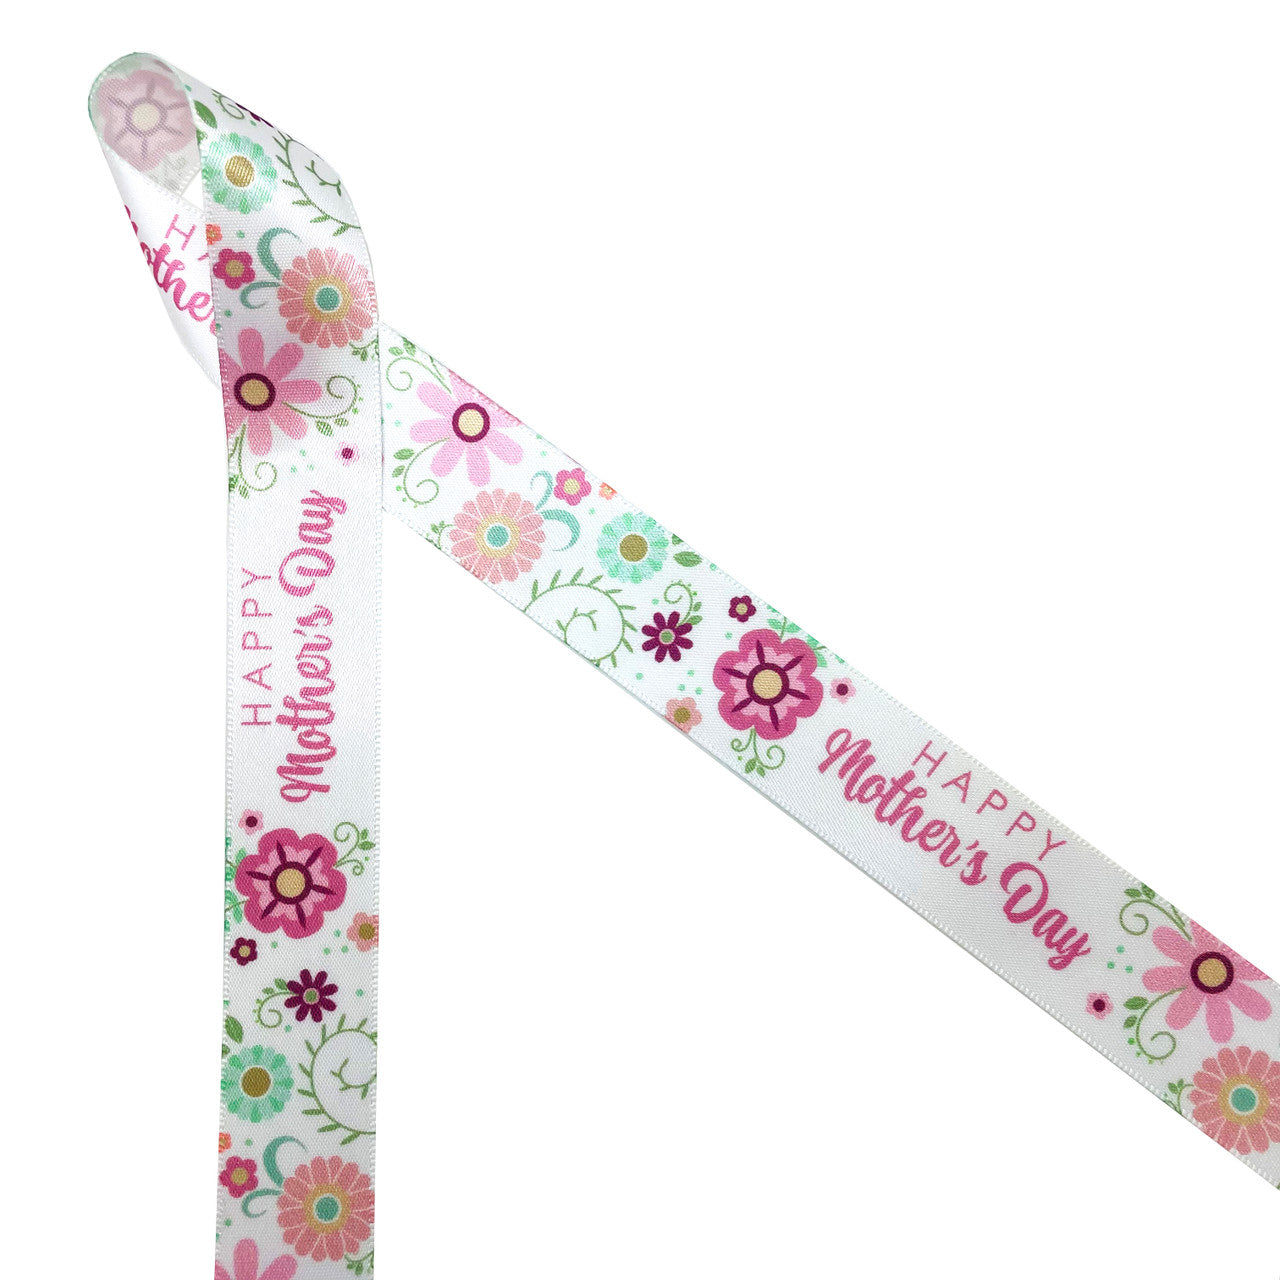 Happy Mother's Day in pink with pink, rose gold and sage florals printed on 7/8" white single face satin ribbon is the ideal ribbon for a Mother's Day celebration! This ribbon is perfect for gift, wrap, floral design, table decor, sweets tables and fun crafts! Be sure to have  this ribbon on hand for Mom's special day! Our ribbon is designed and printed in the USA